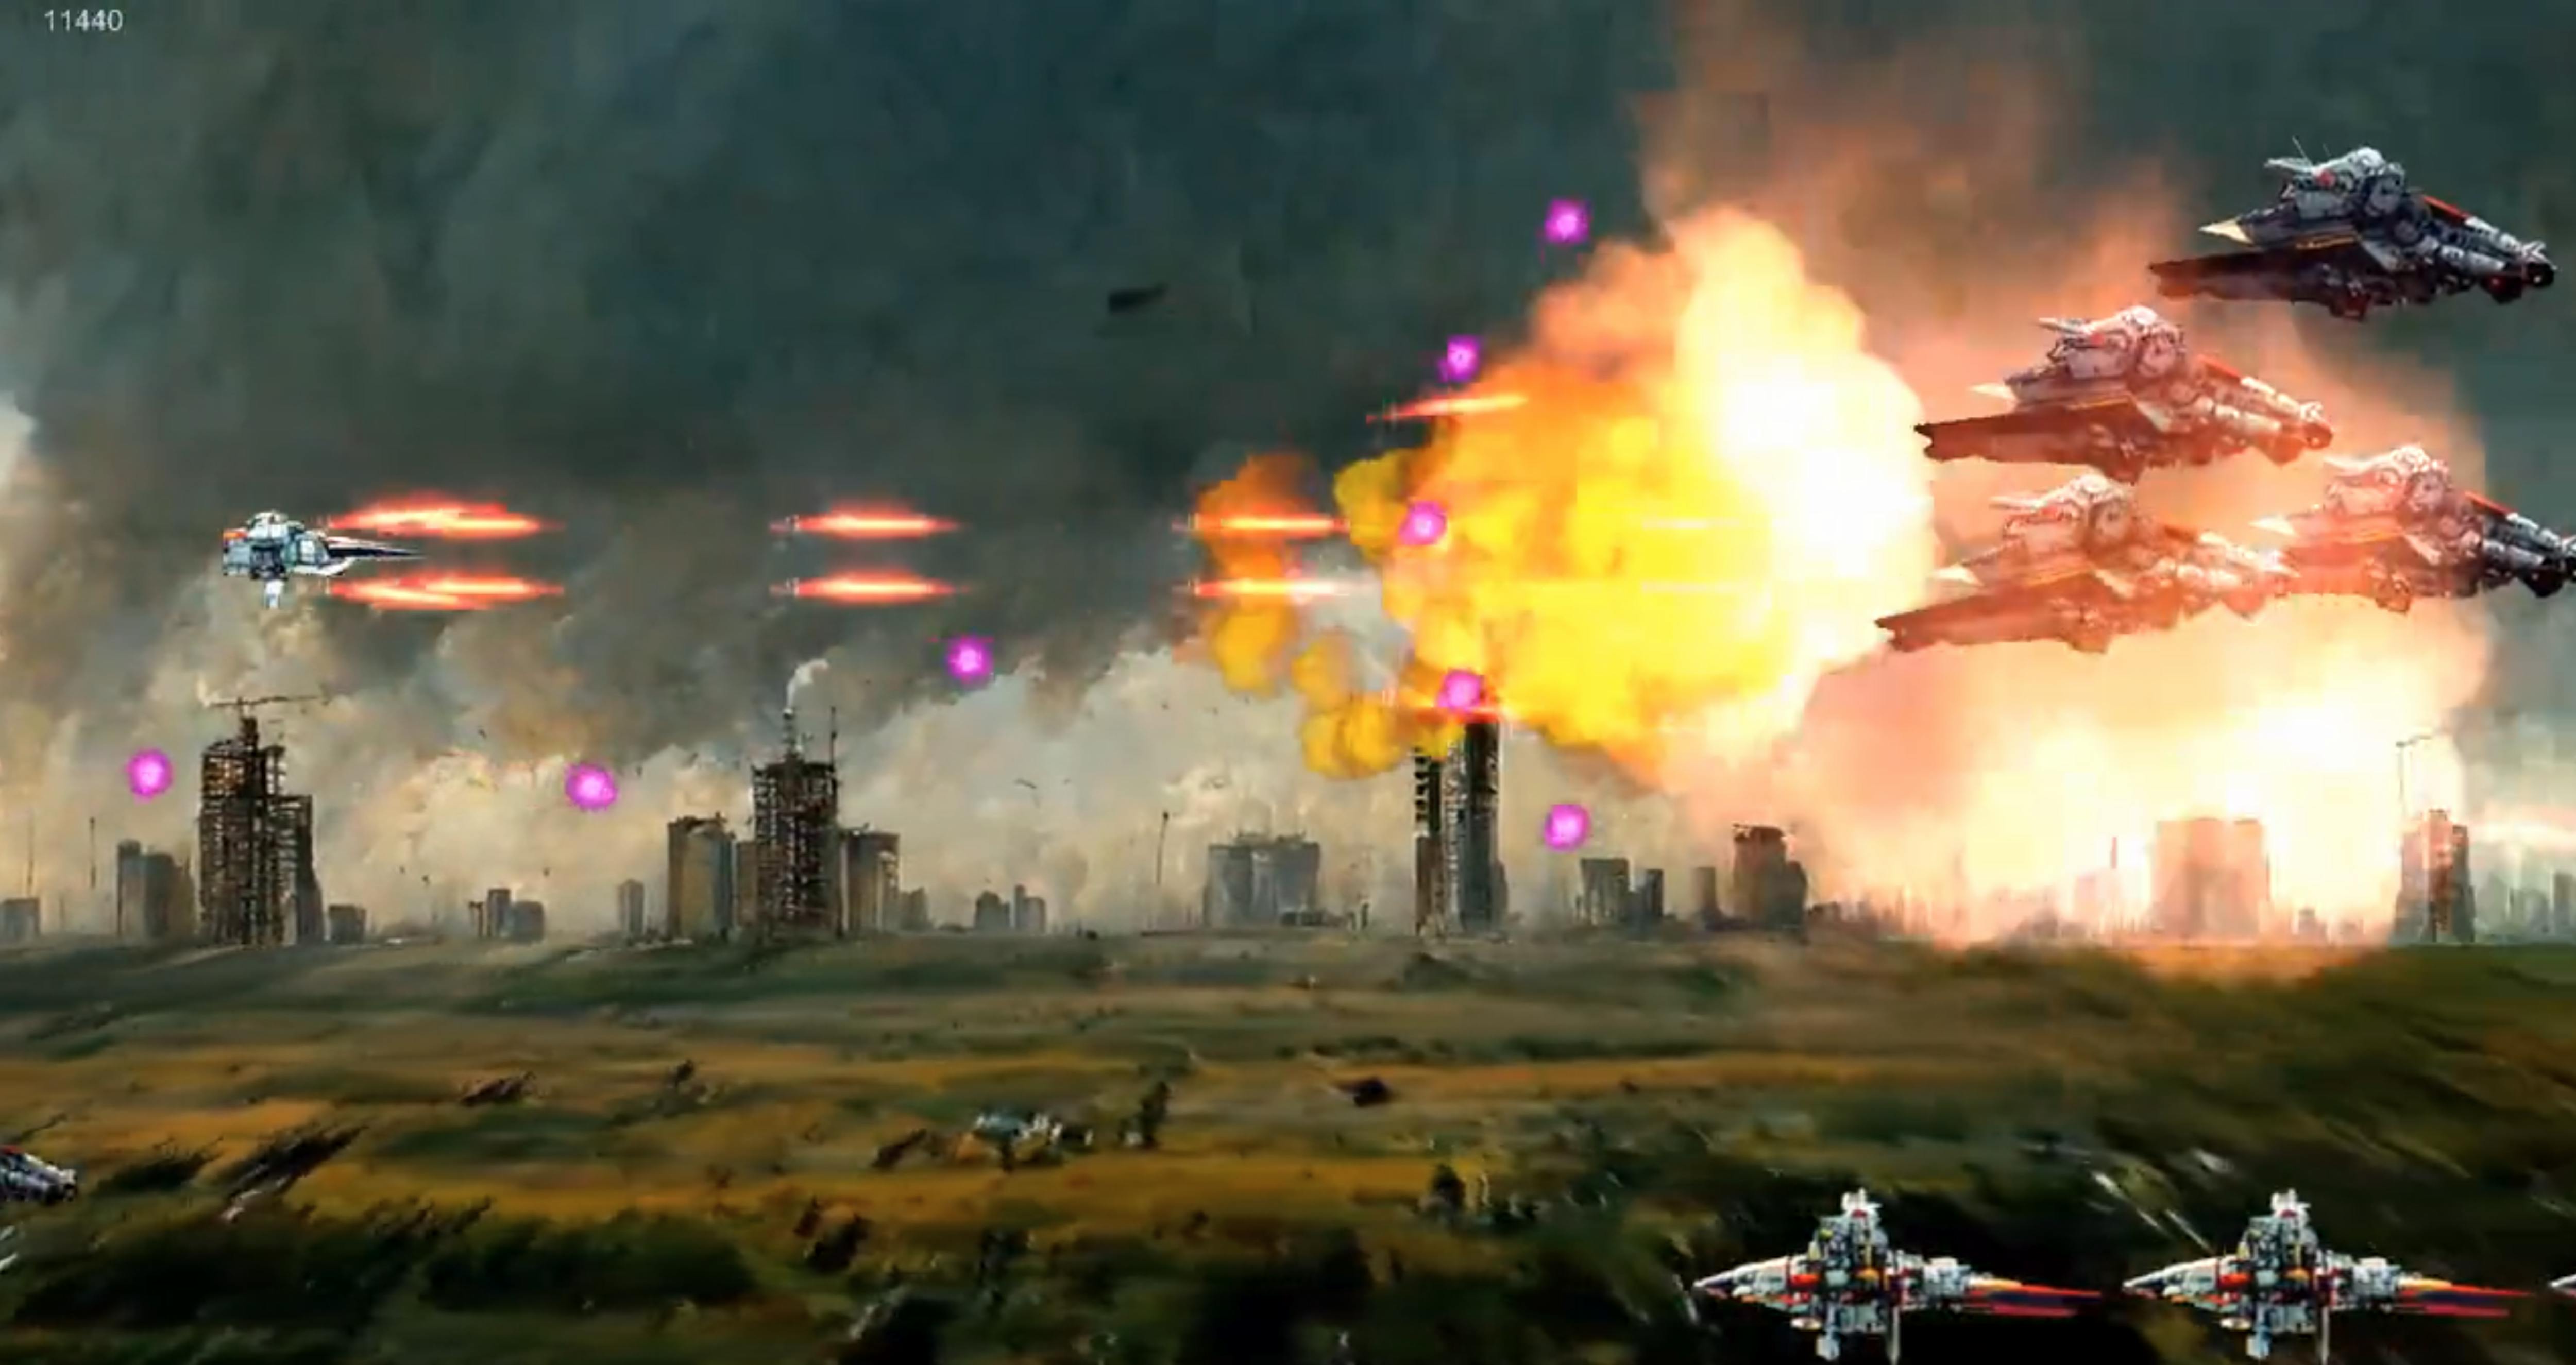 Screenshot of a space-themed shoot-'em-up game, Shoon, created in Midjourney. At left, one small ship fires at several larger ones on the right, with a large explosion in the middle. The battle occurs over a grey cityscape.